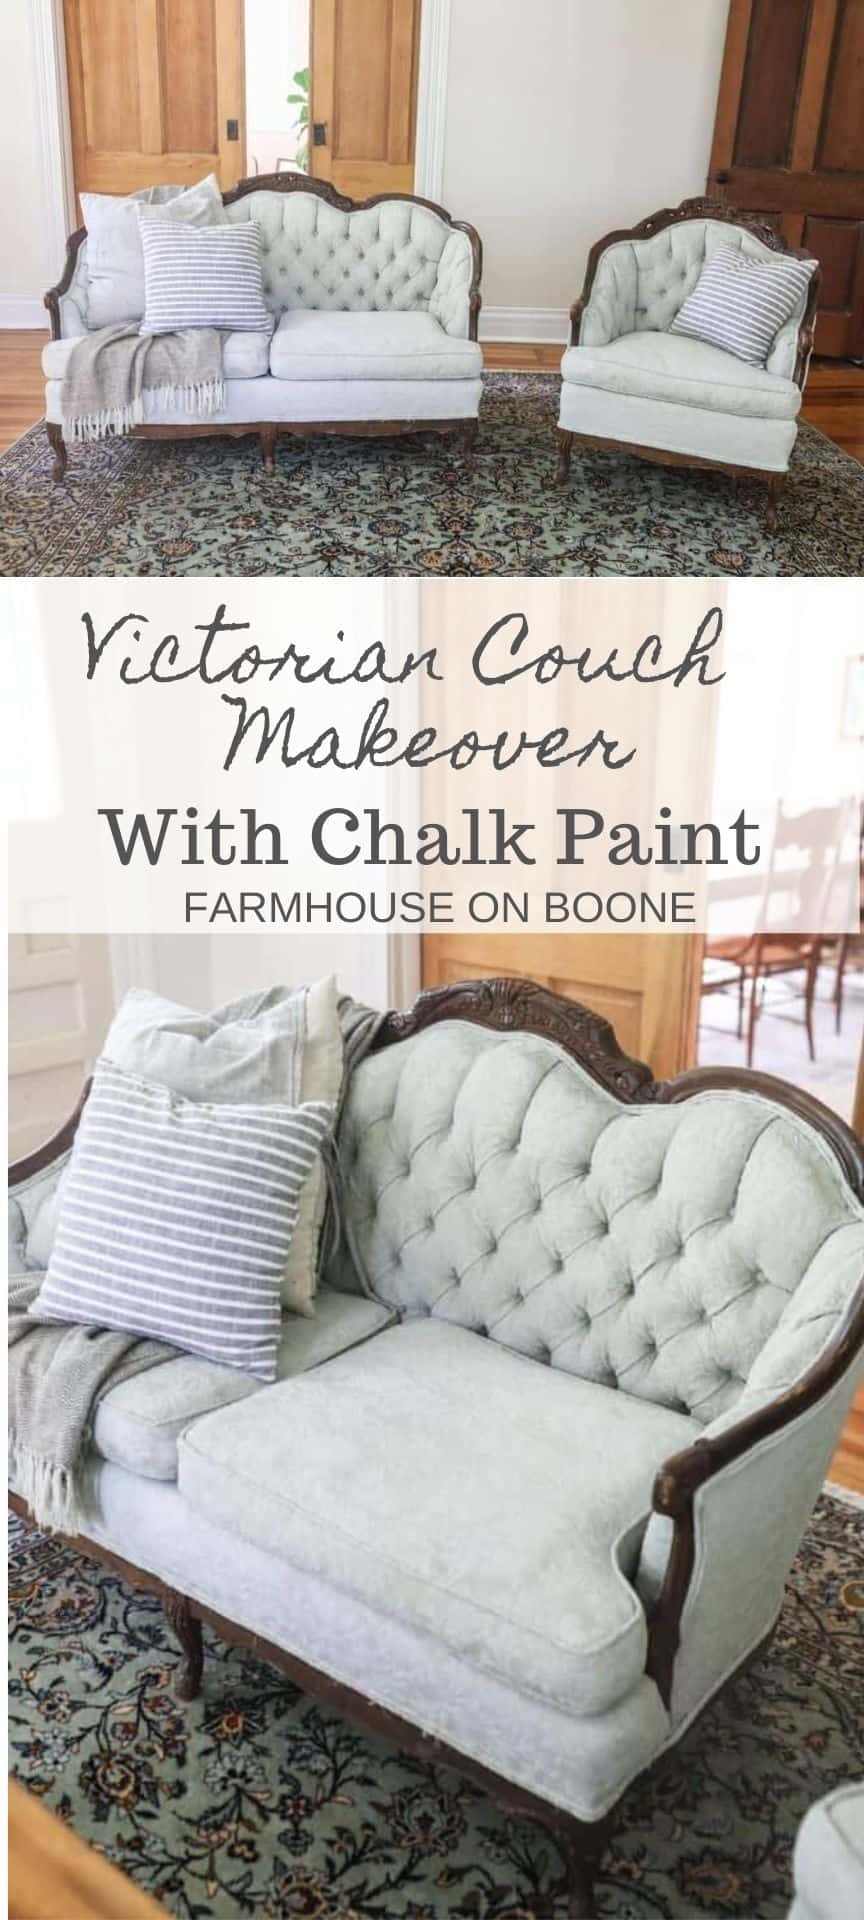 How To Chalk Paint Upholstery- Antique Sofa Makeover - Farmhouse